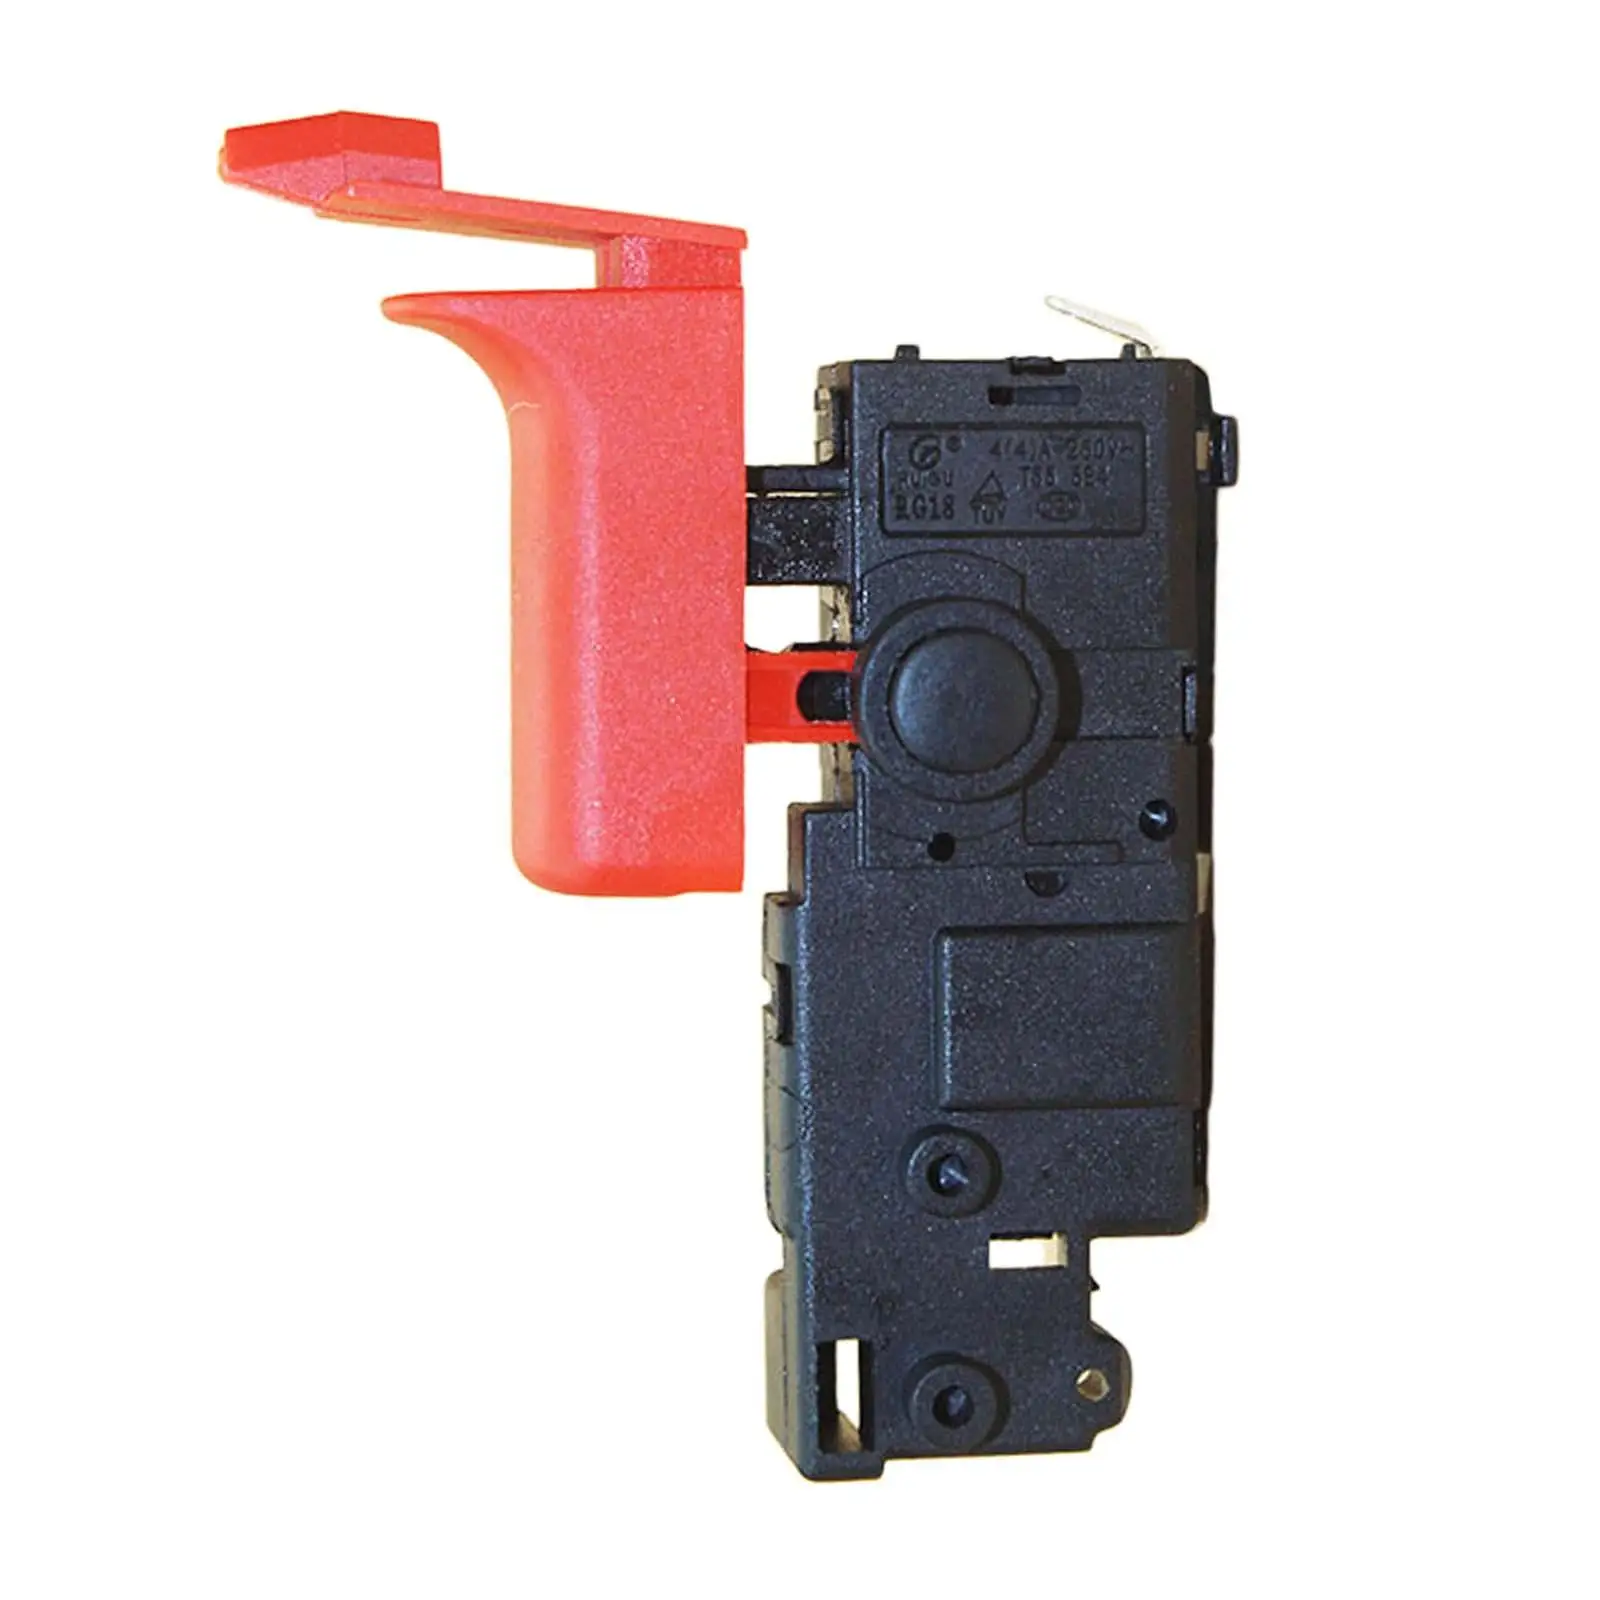 Rotory Hammer Switch Replacement for  GBH 2-28 D/22/26 GBH2-26DRE